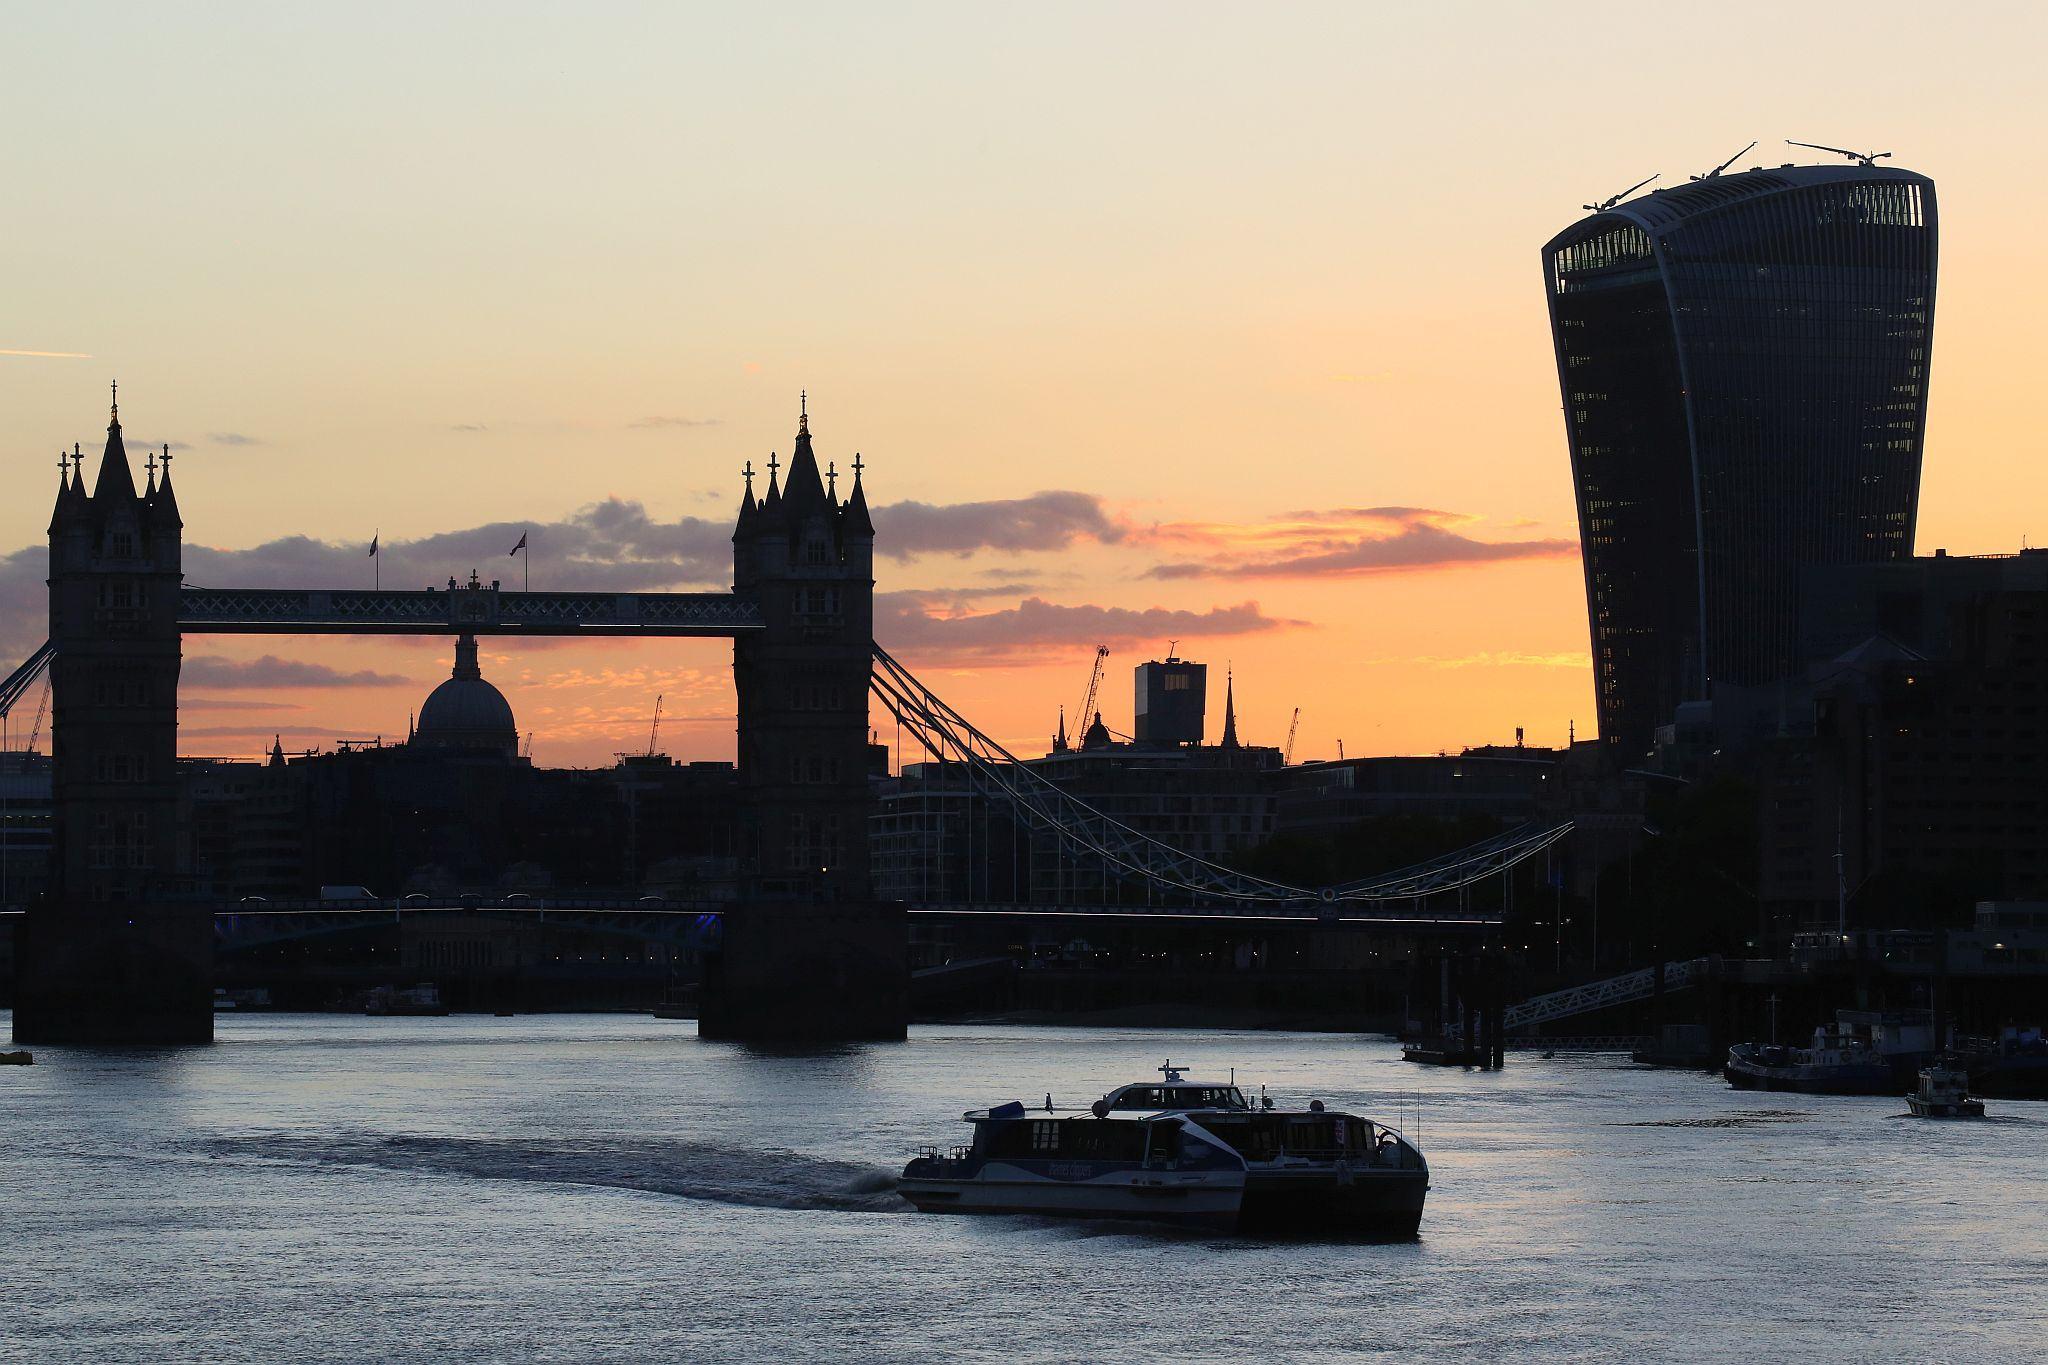 Tower Bridge, on the River Thames in London, at sunset. 06-Jul-2020.